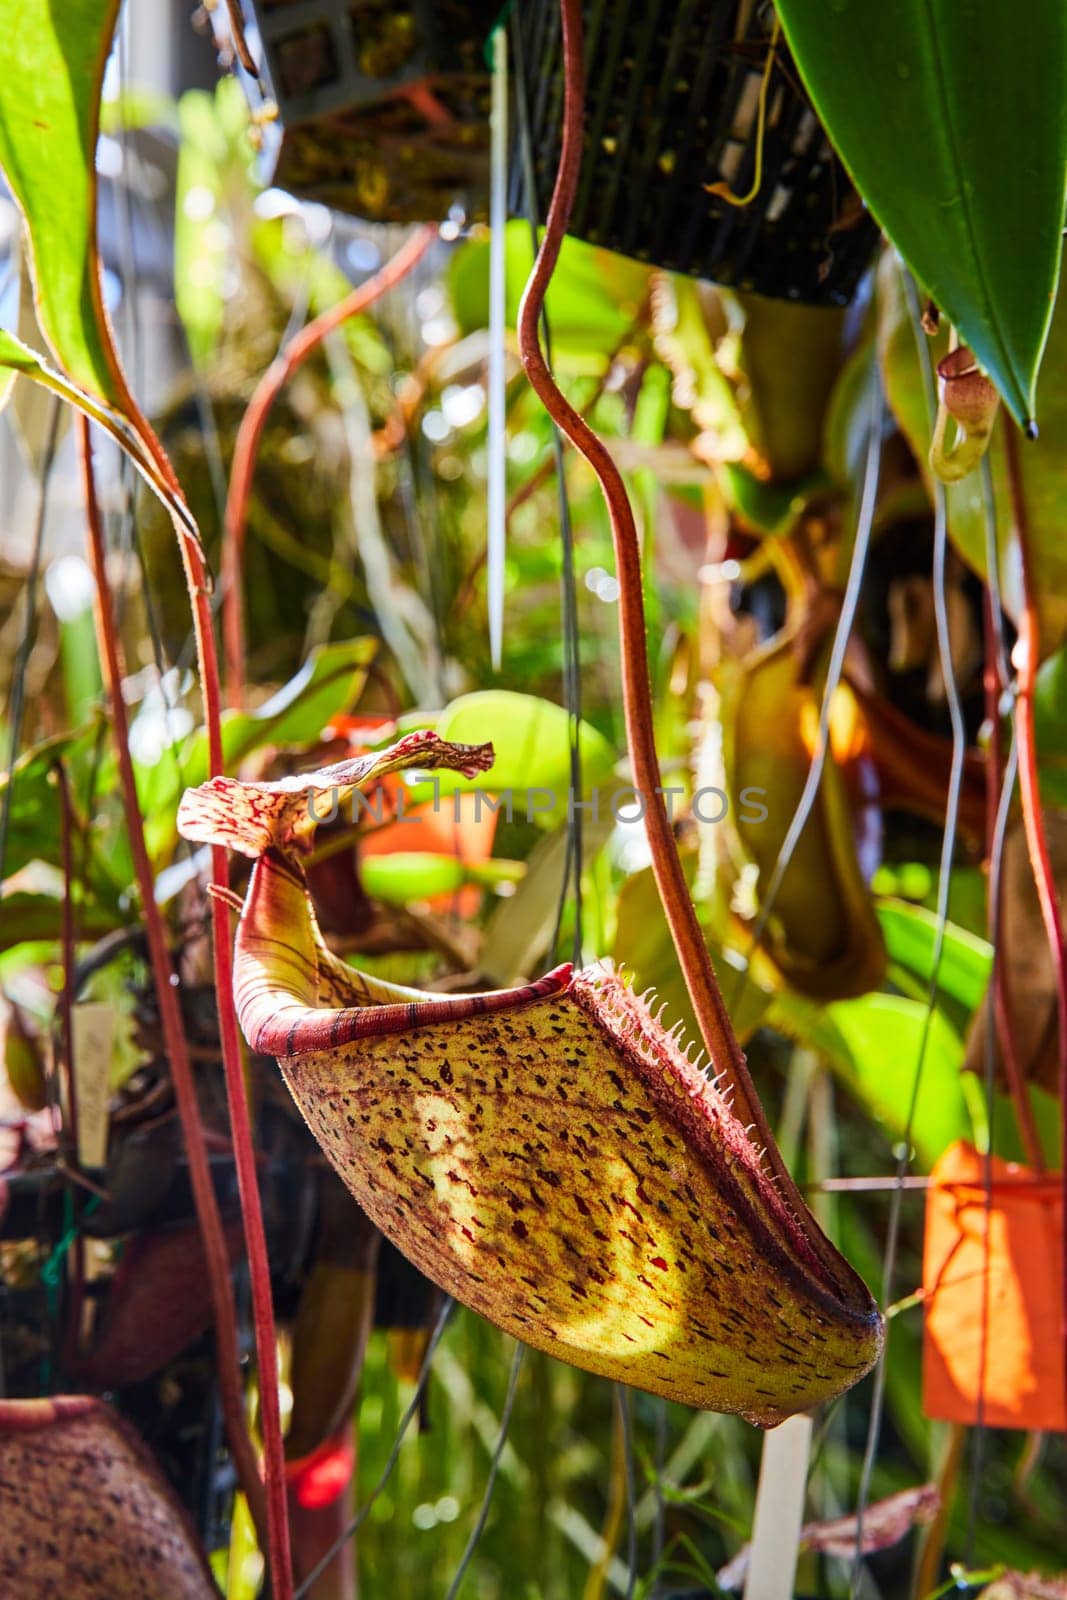 Close-Up Tropical Pitcher Plant in Greenhouse Environment by njproductions